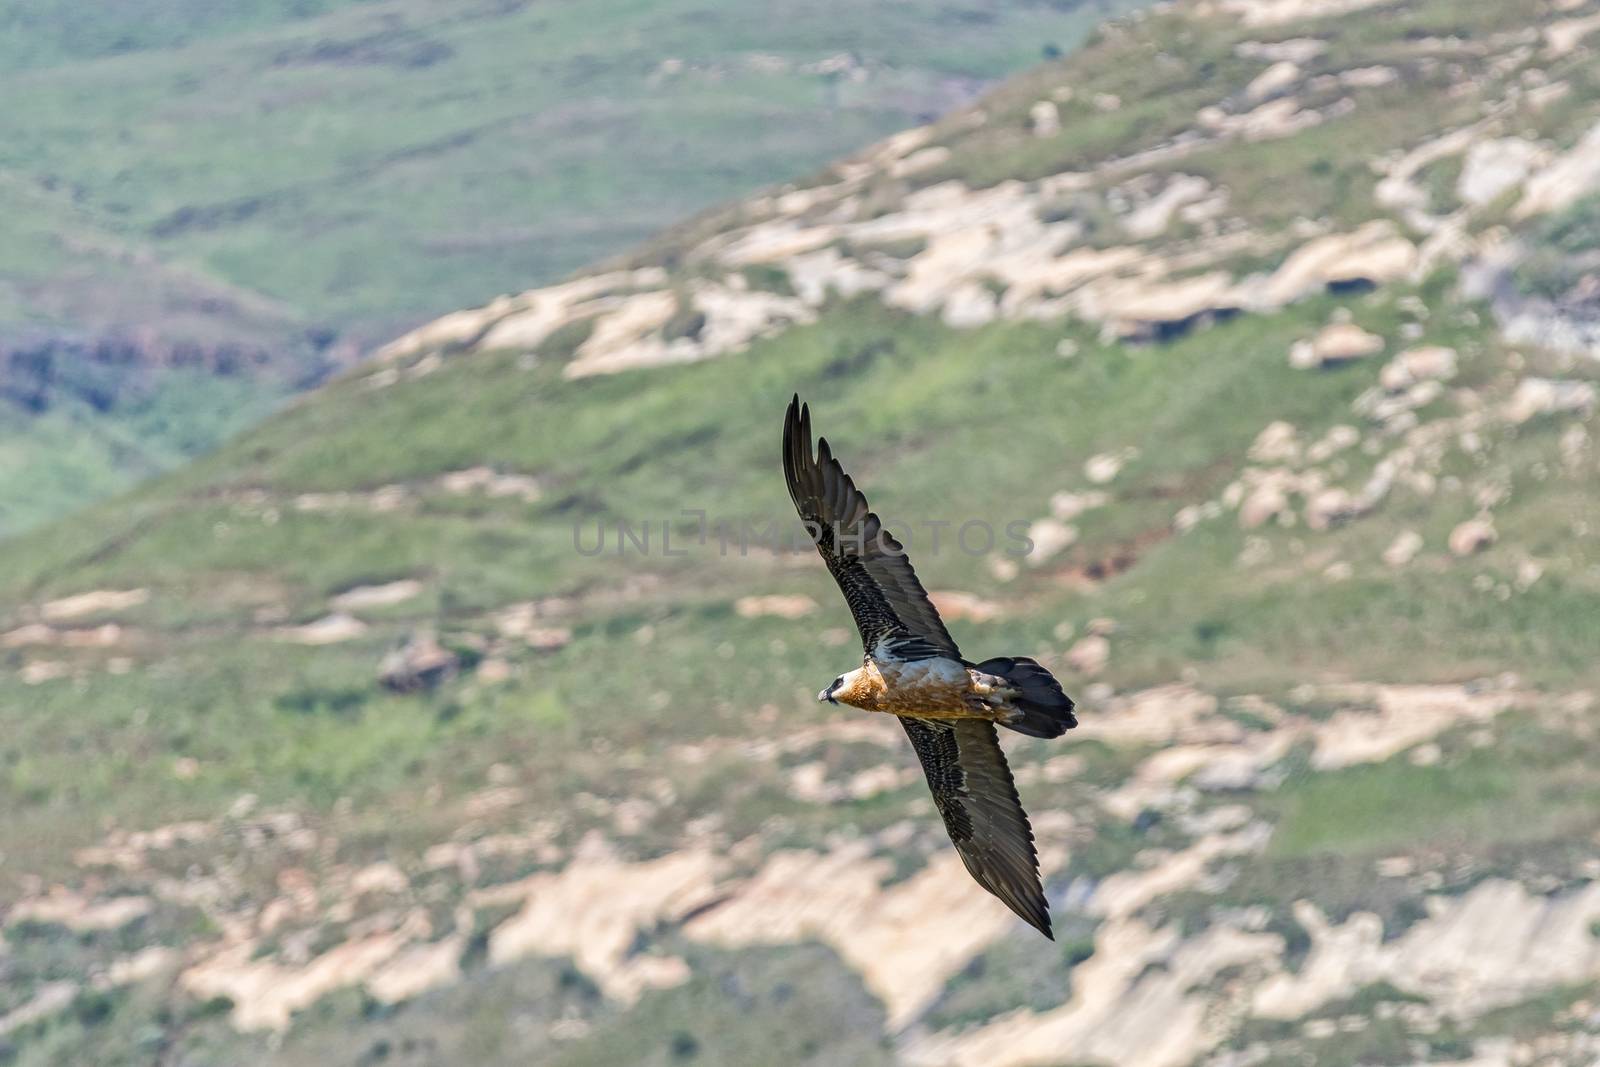 A Bearded Vulture, Gypaetus barbatus, in flight at Golden Gate in the Free State Province